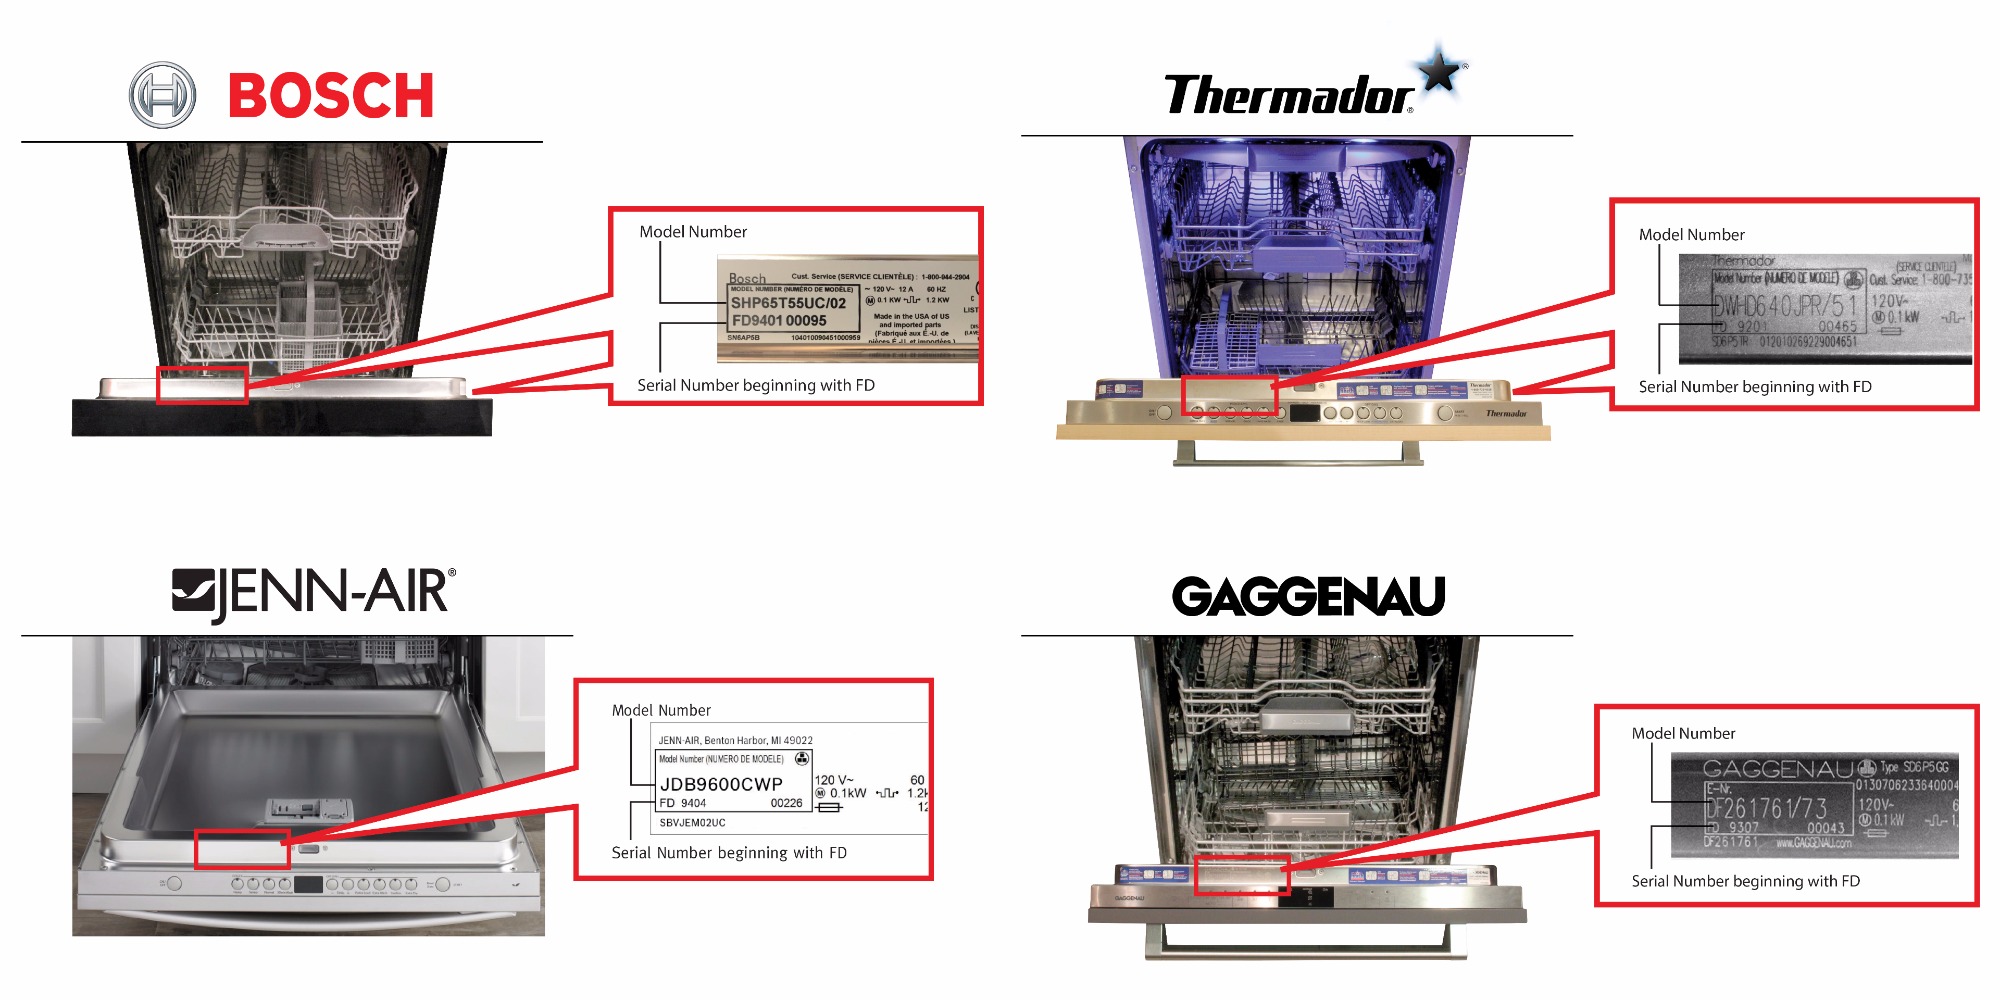 Fiery Dishwasher Recall Expanded To Cover 557,000 Total Machines